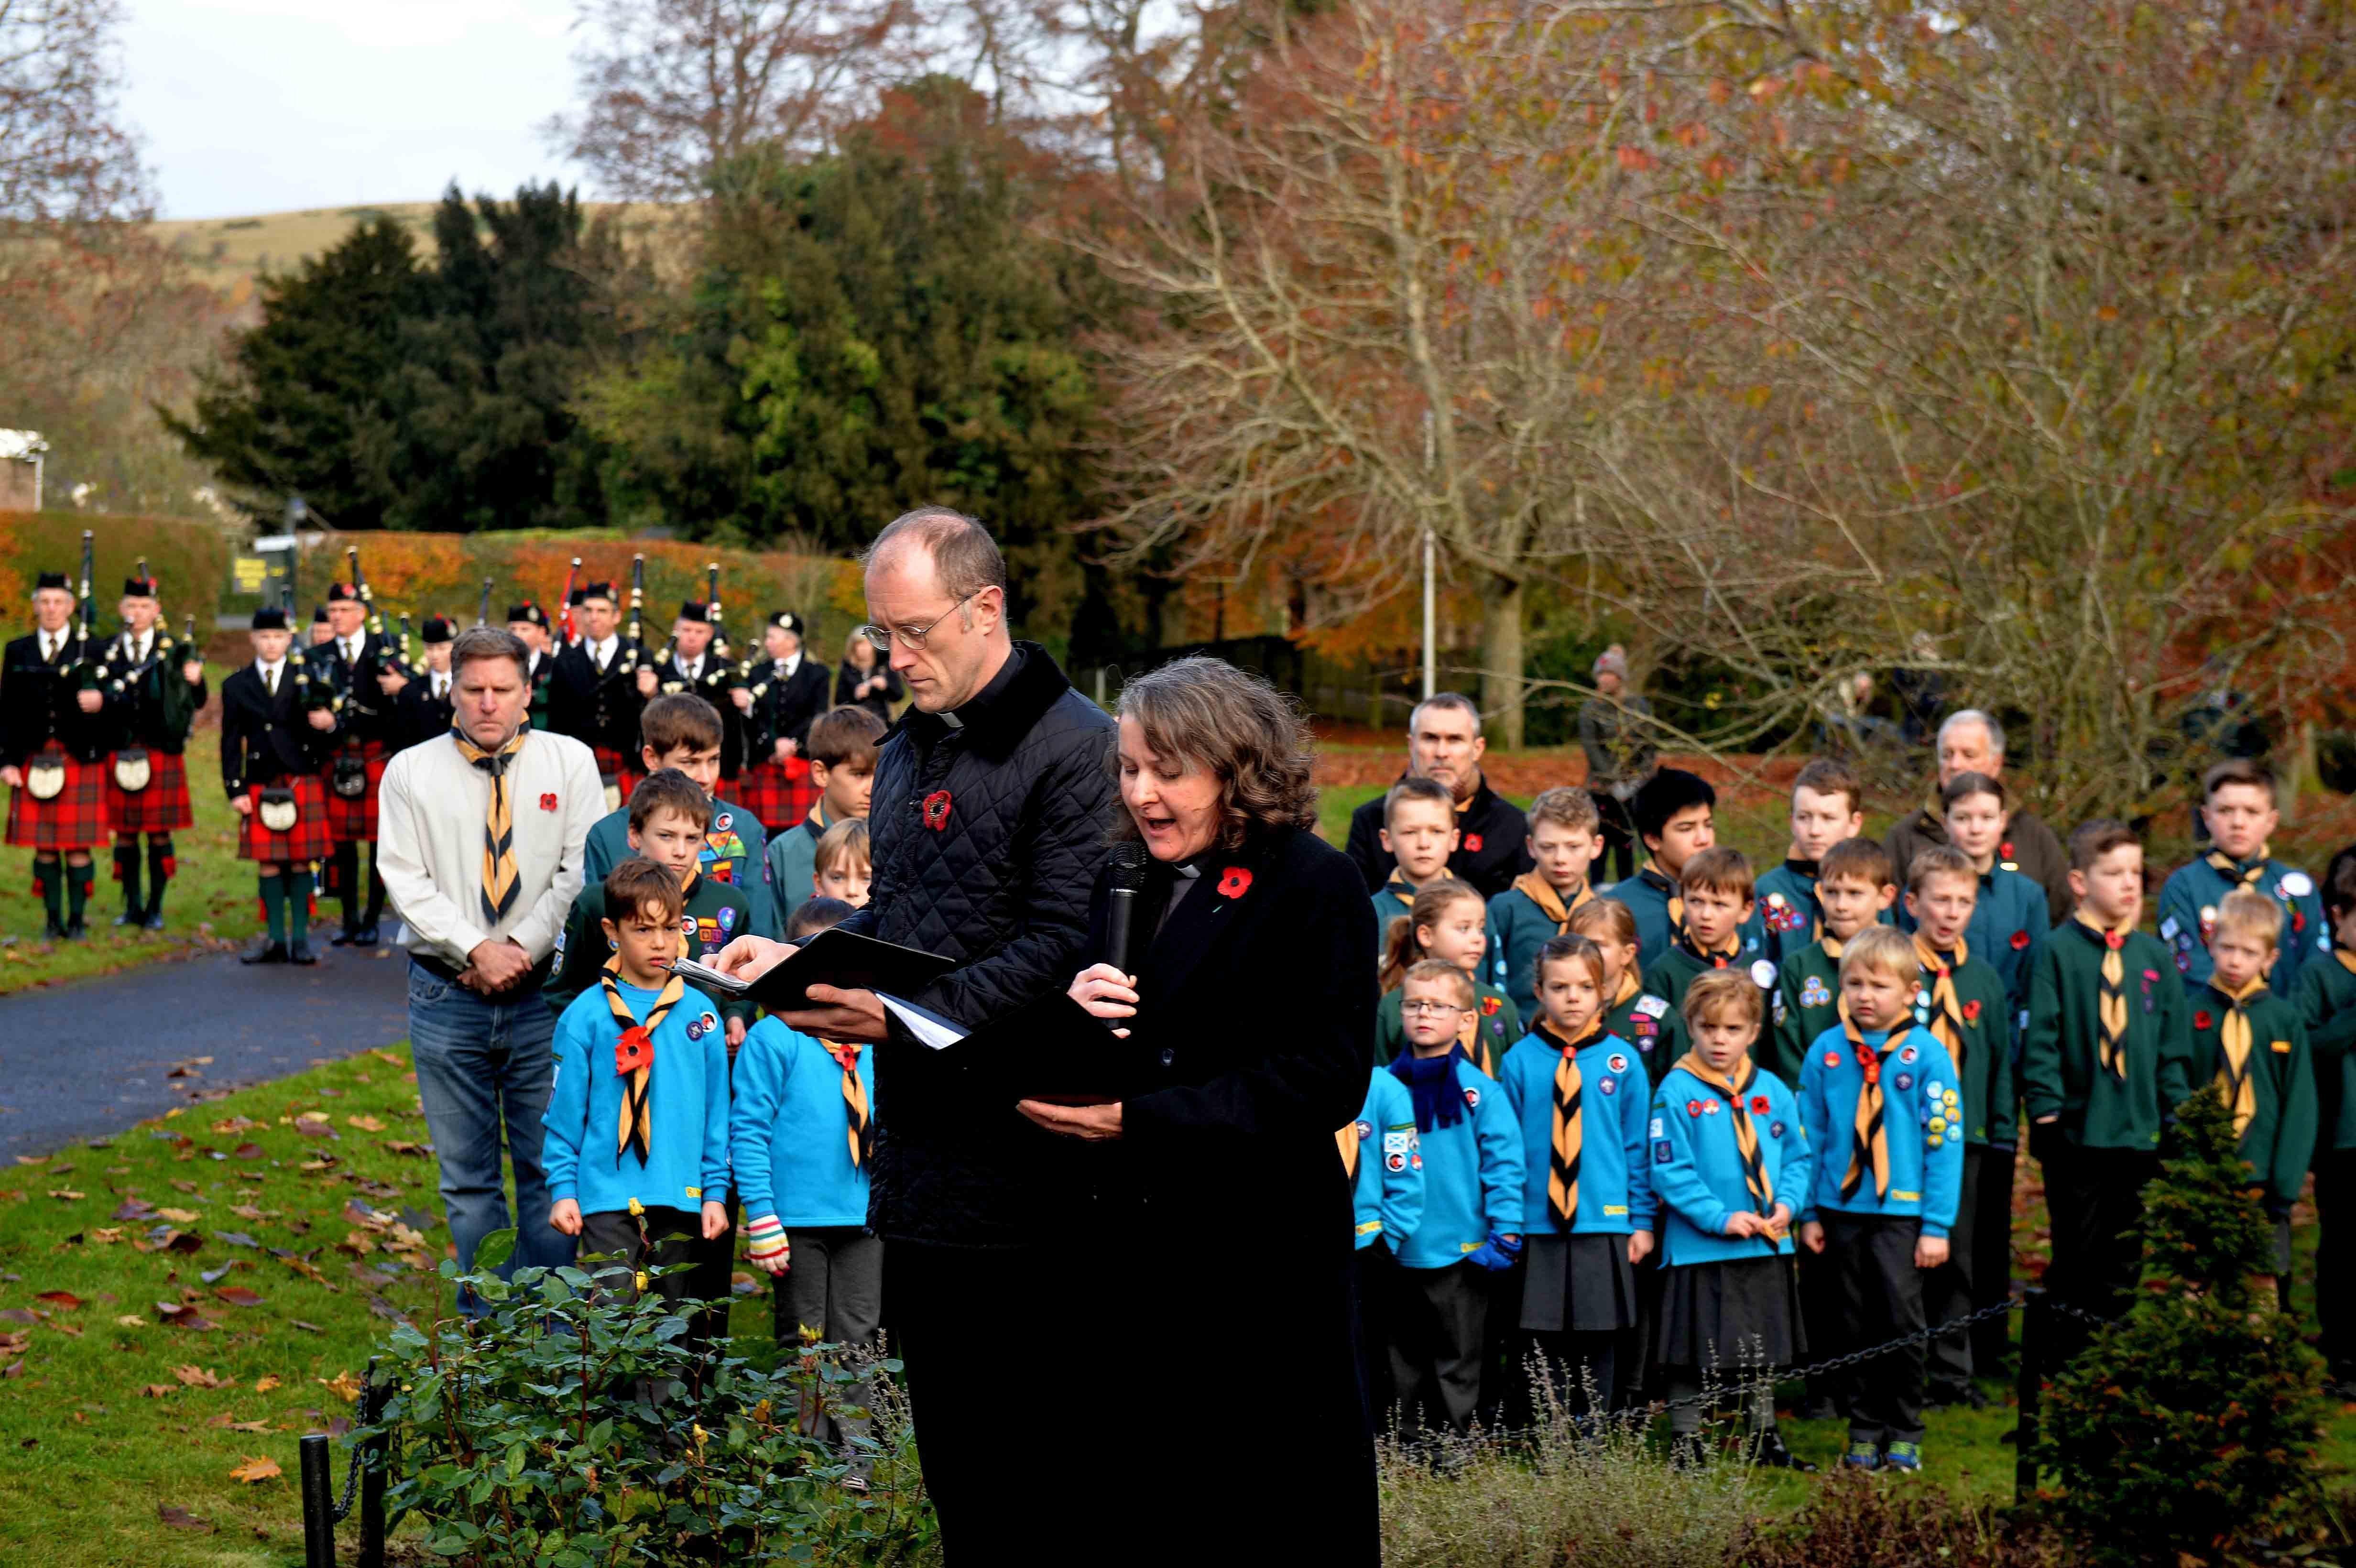 Rev Rosemary Frew and Rev Philip Blackledge lead the act of remembrance in Melrose.